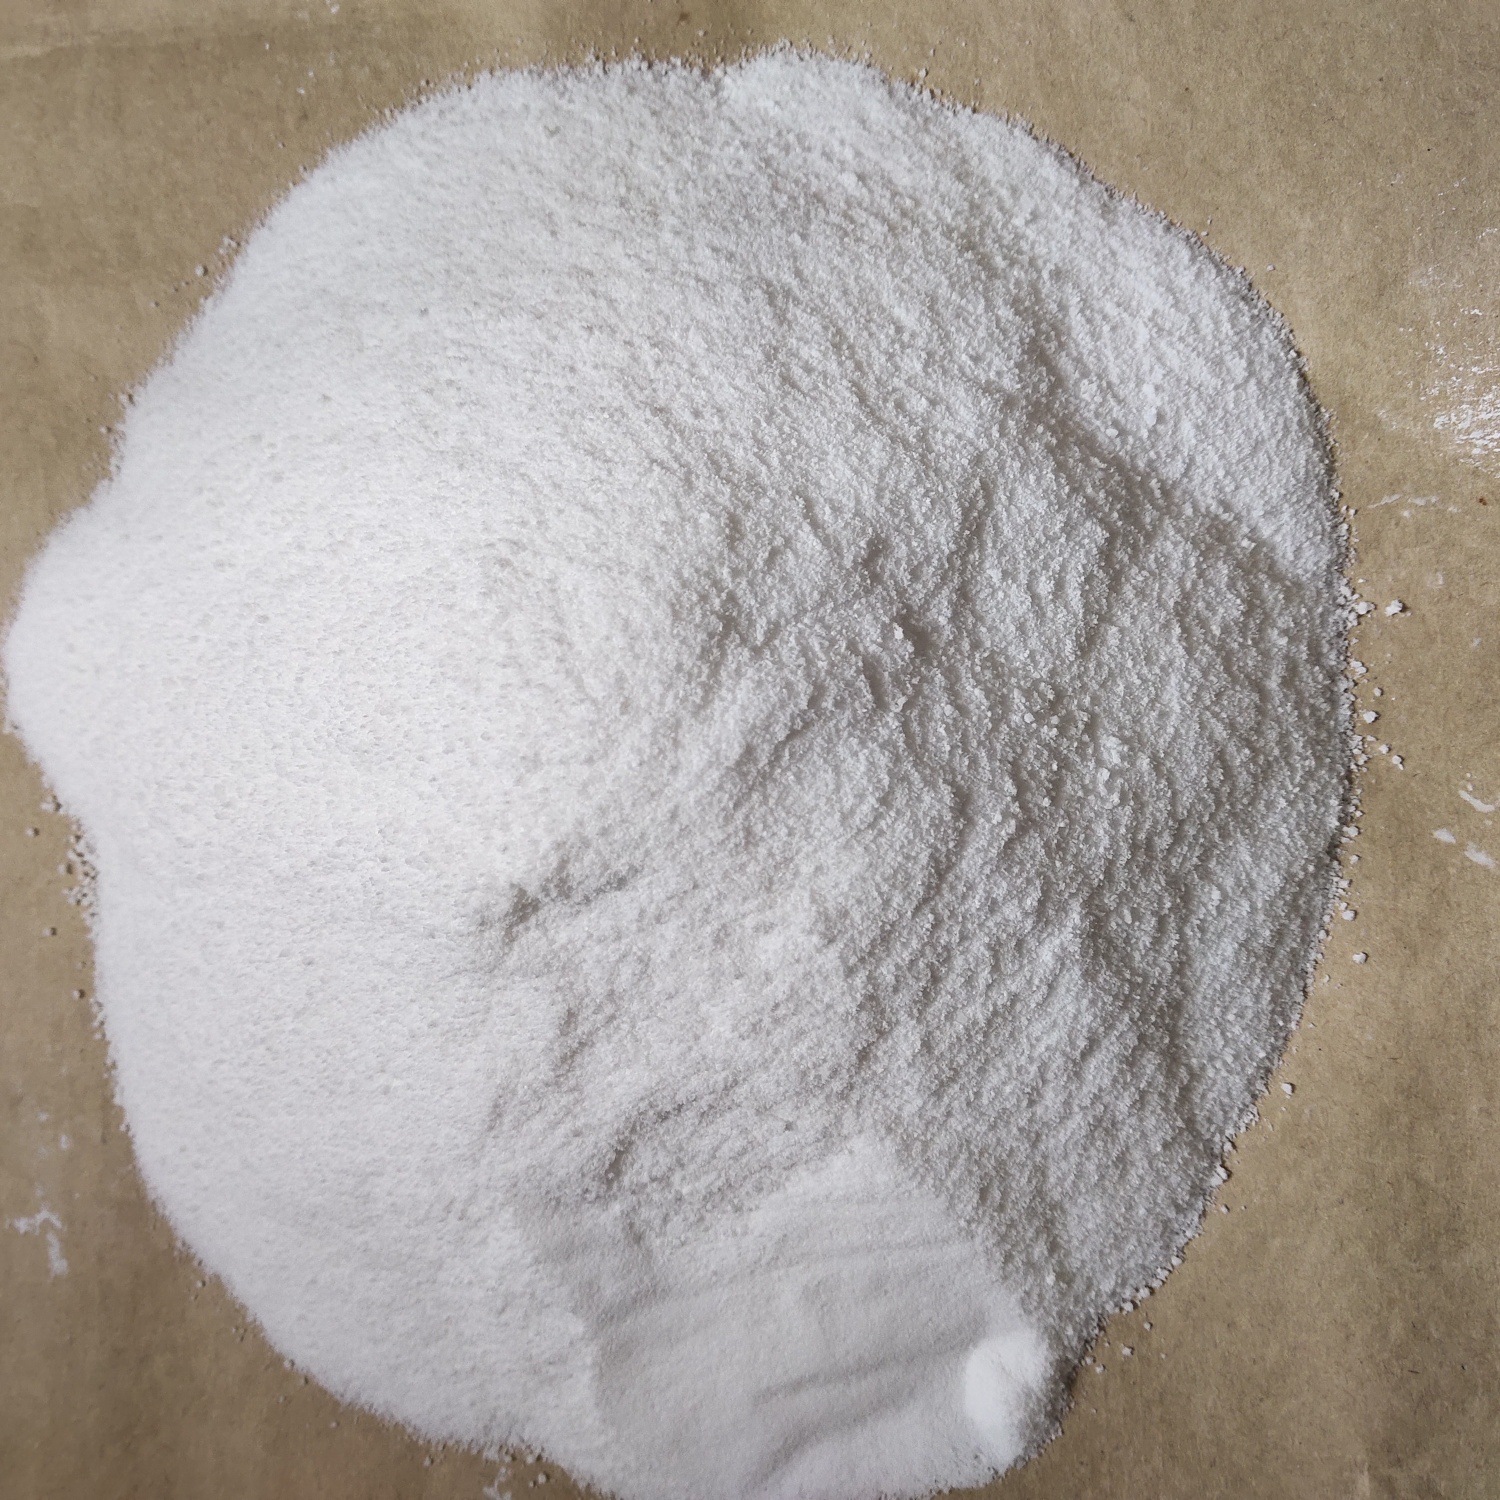 XT-30F: The High-Efficiency Powder That\'s Changing the Game for Flame Retardants